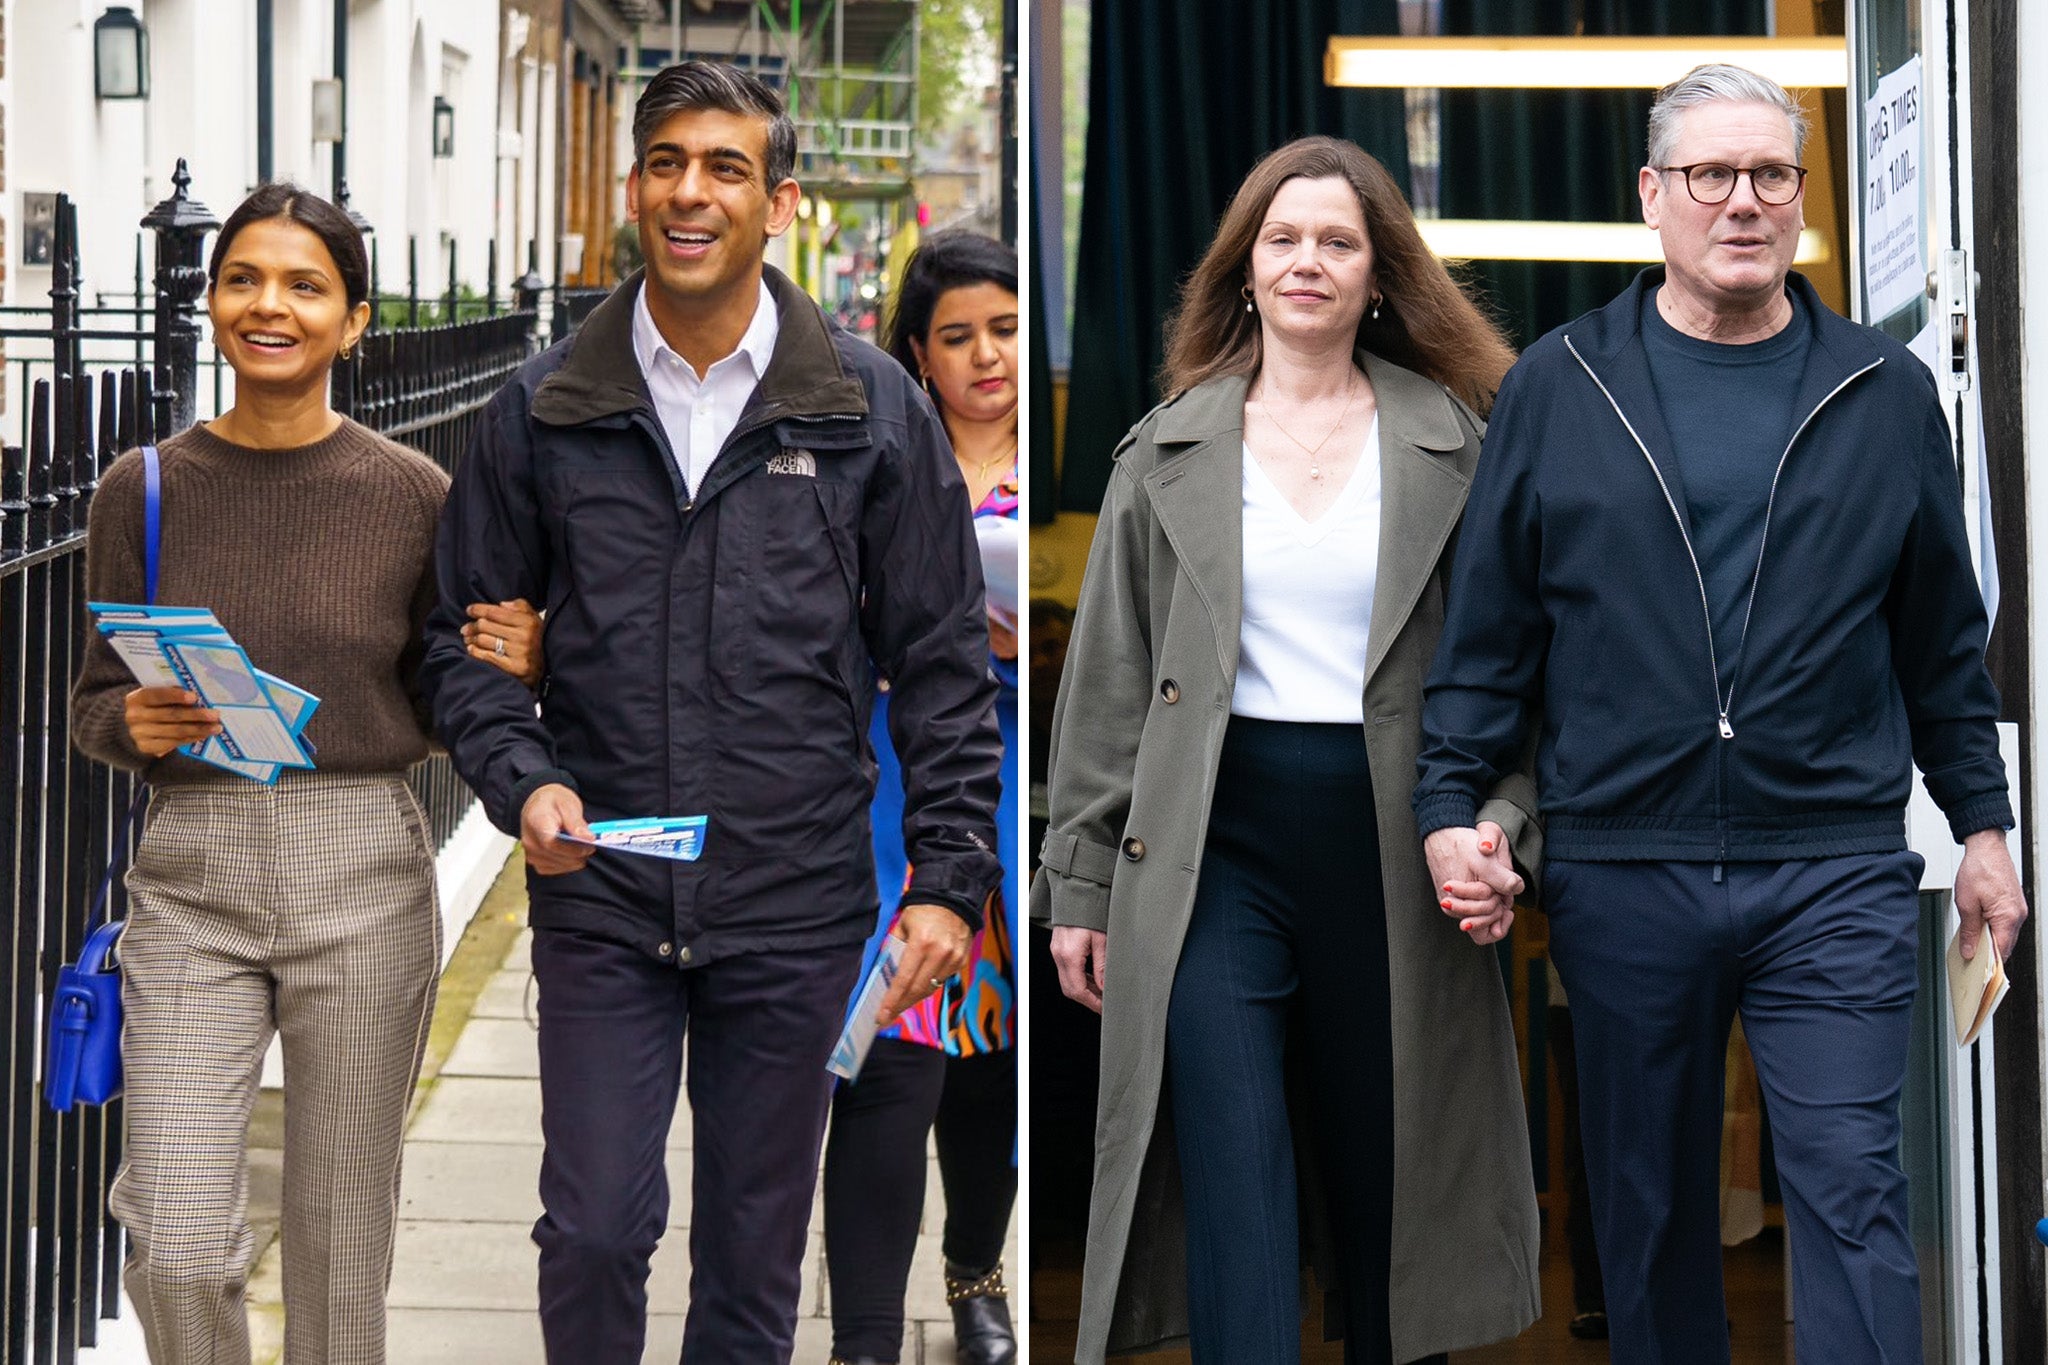 Rishi Sunak and Keir Starmer will now battle it out for the keys to No 10